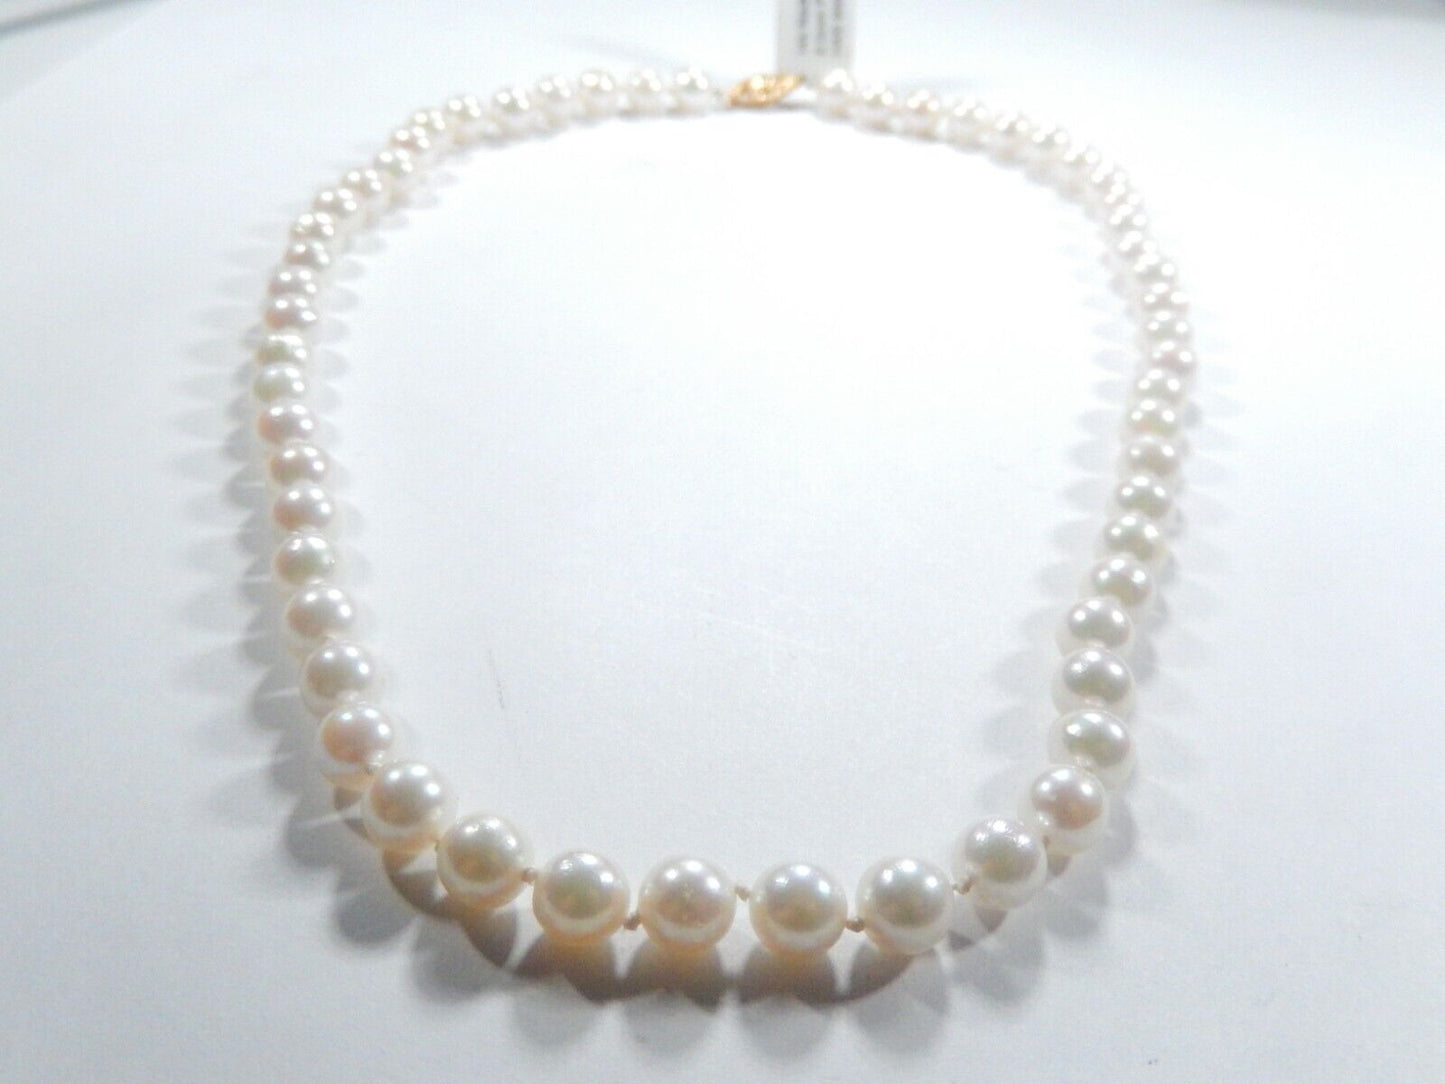 *VINTAGE* 6.25mm Cultured Round Fresh Water Pearls/14k Gold Clasp (Marked) 16"